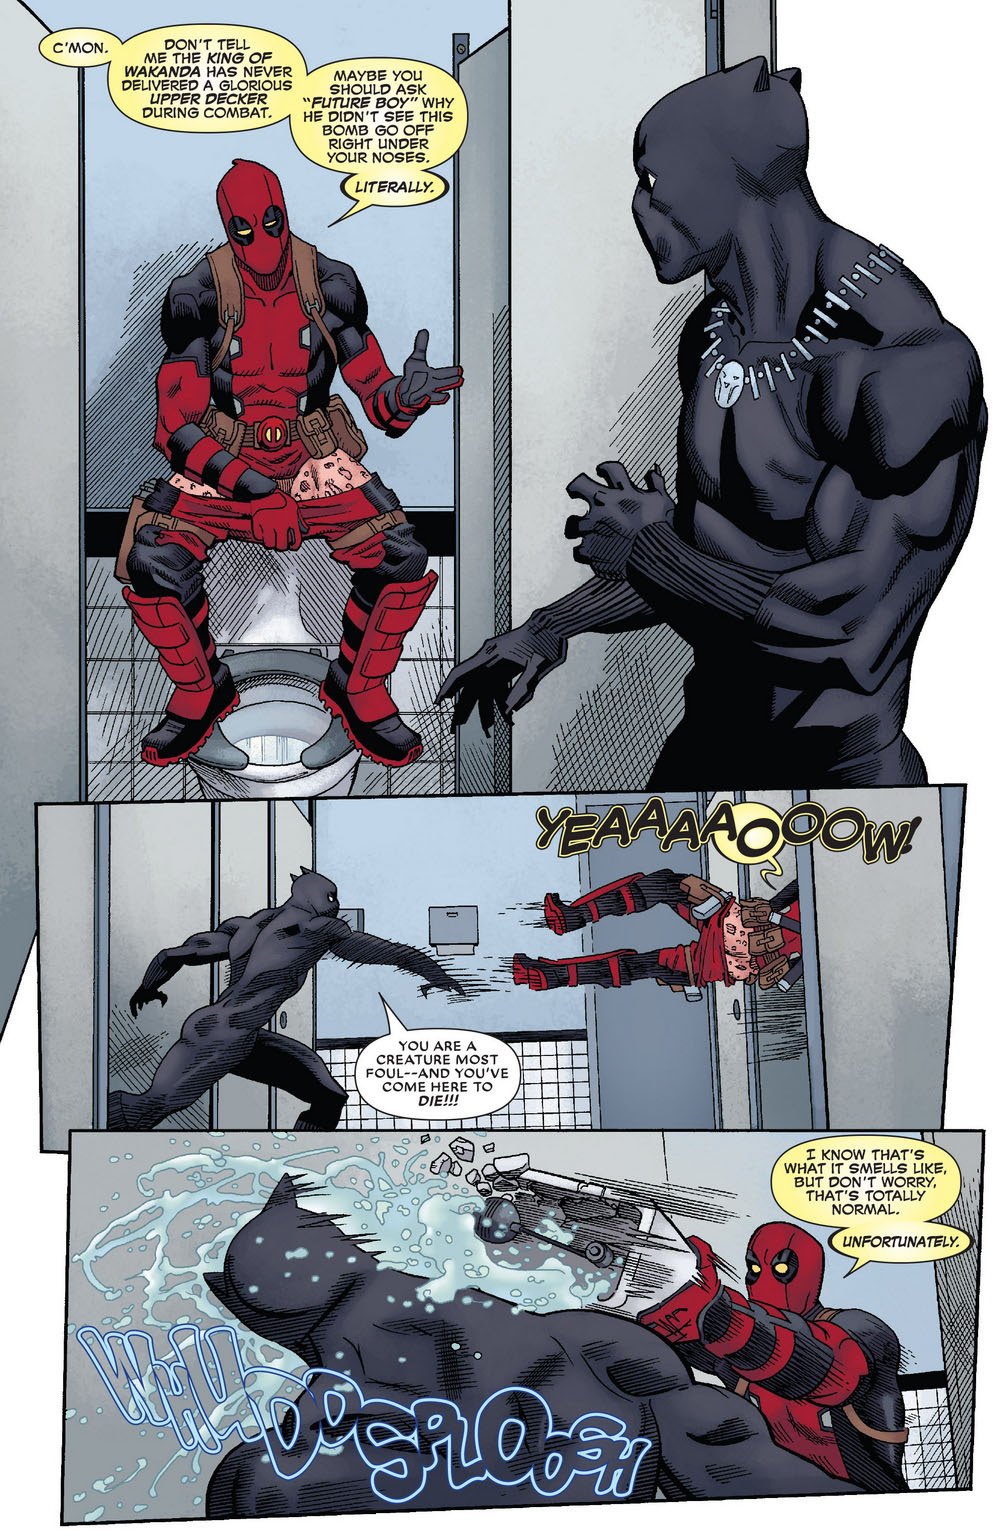 23 Times Deadpool Ruined The Moment SMOSH